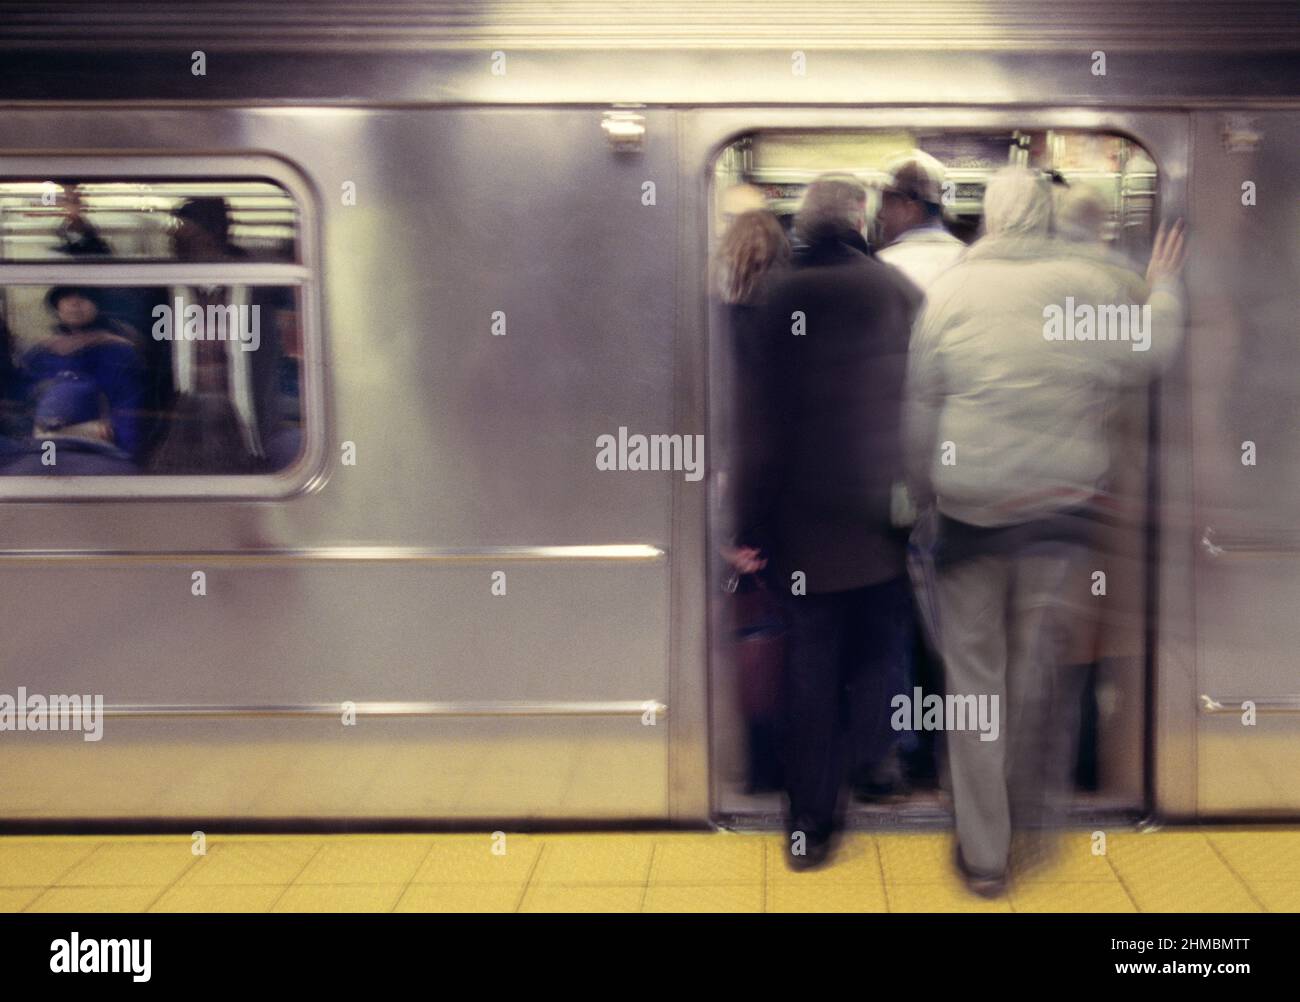 Subway station platform crowd in New York City. Subway door. People pushing and crowding inside train. New York commuter transportation at rush hour. Stock Photo